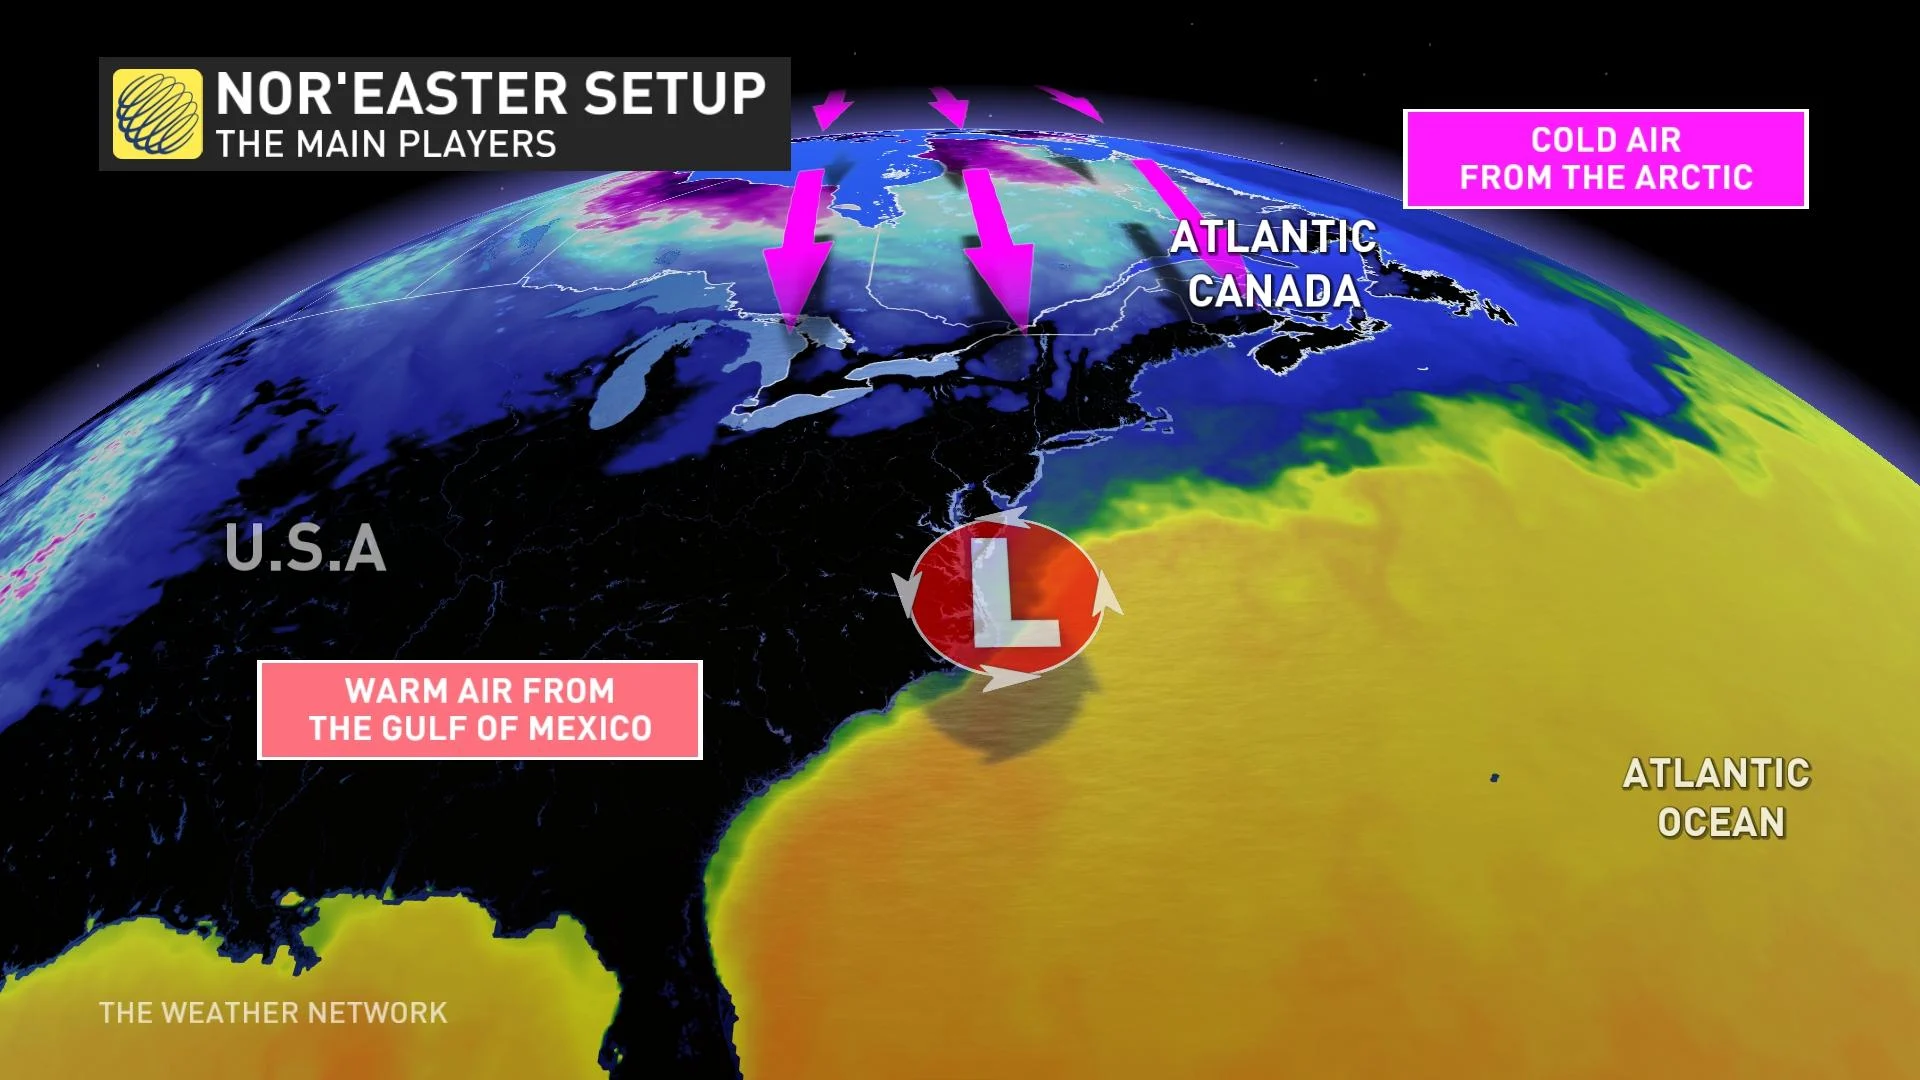 Explainer: Nor'easter set up. What is a nor'easter?